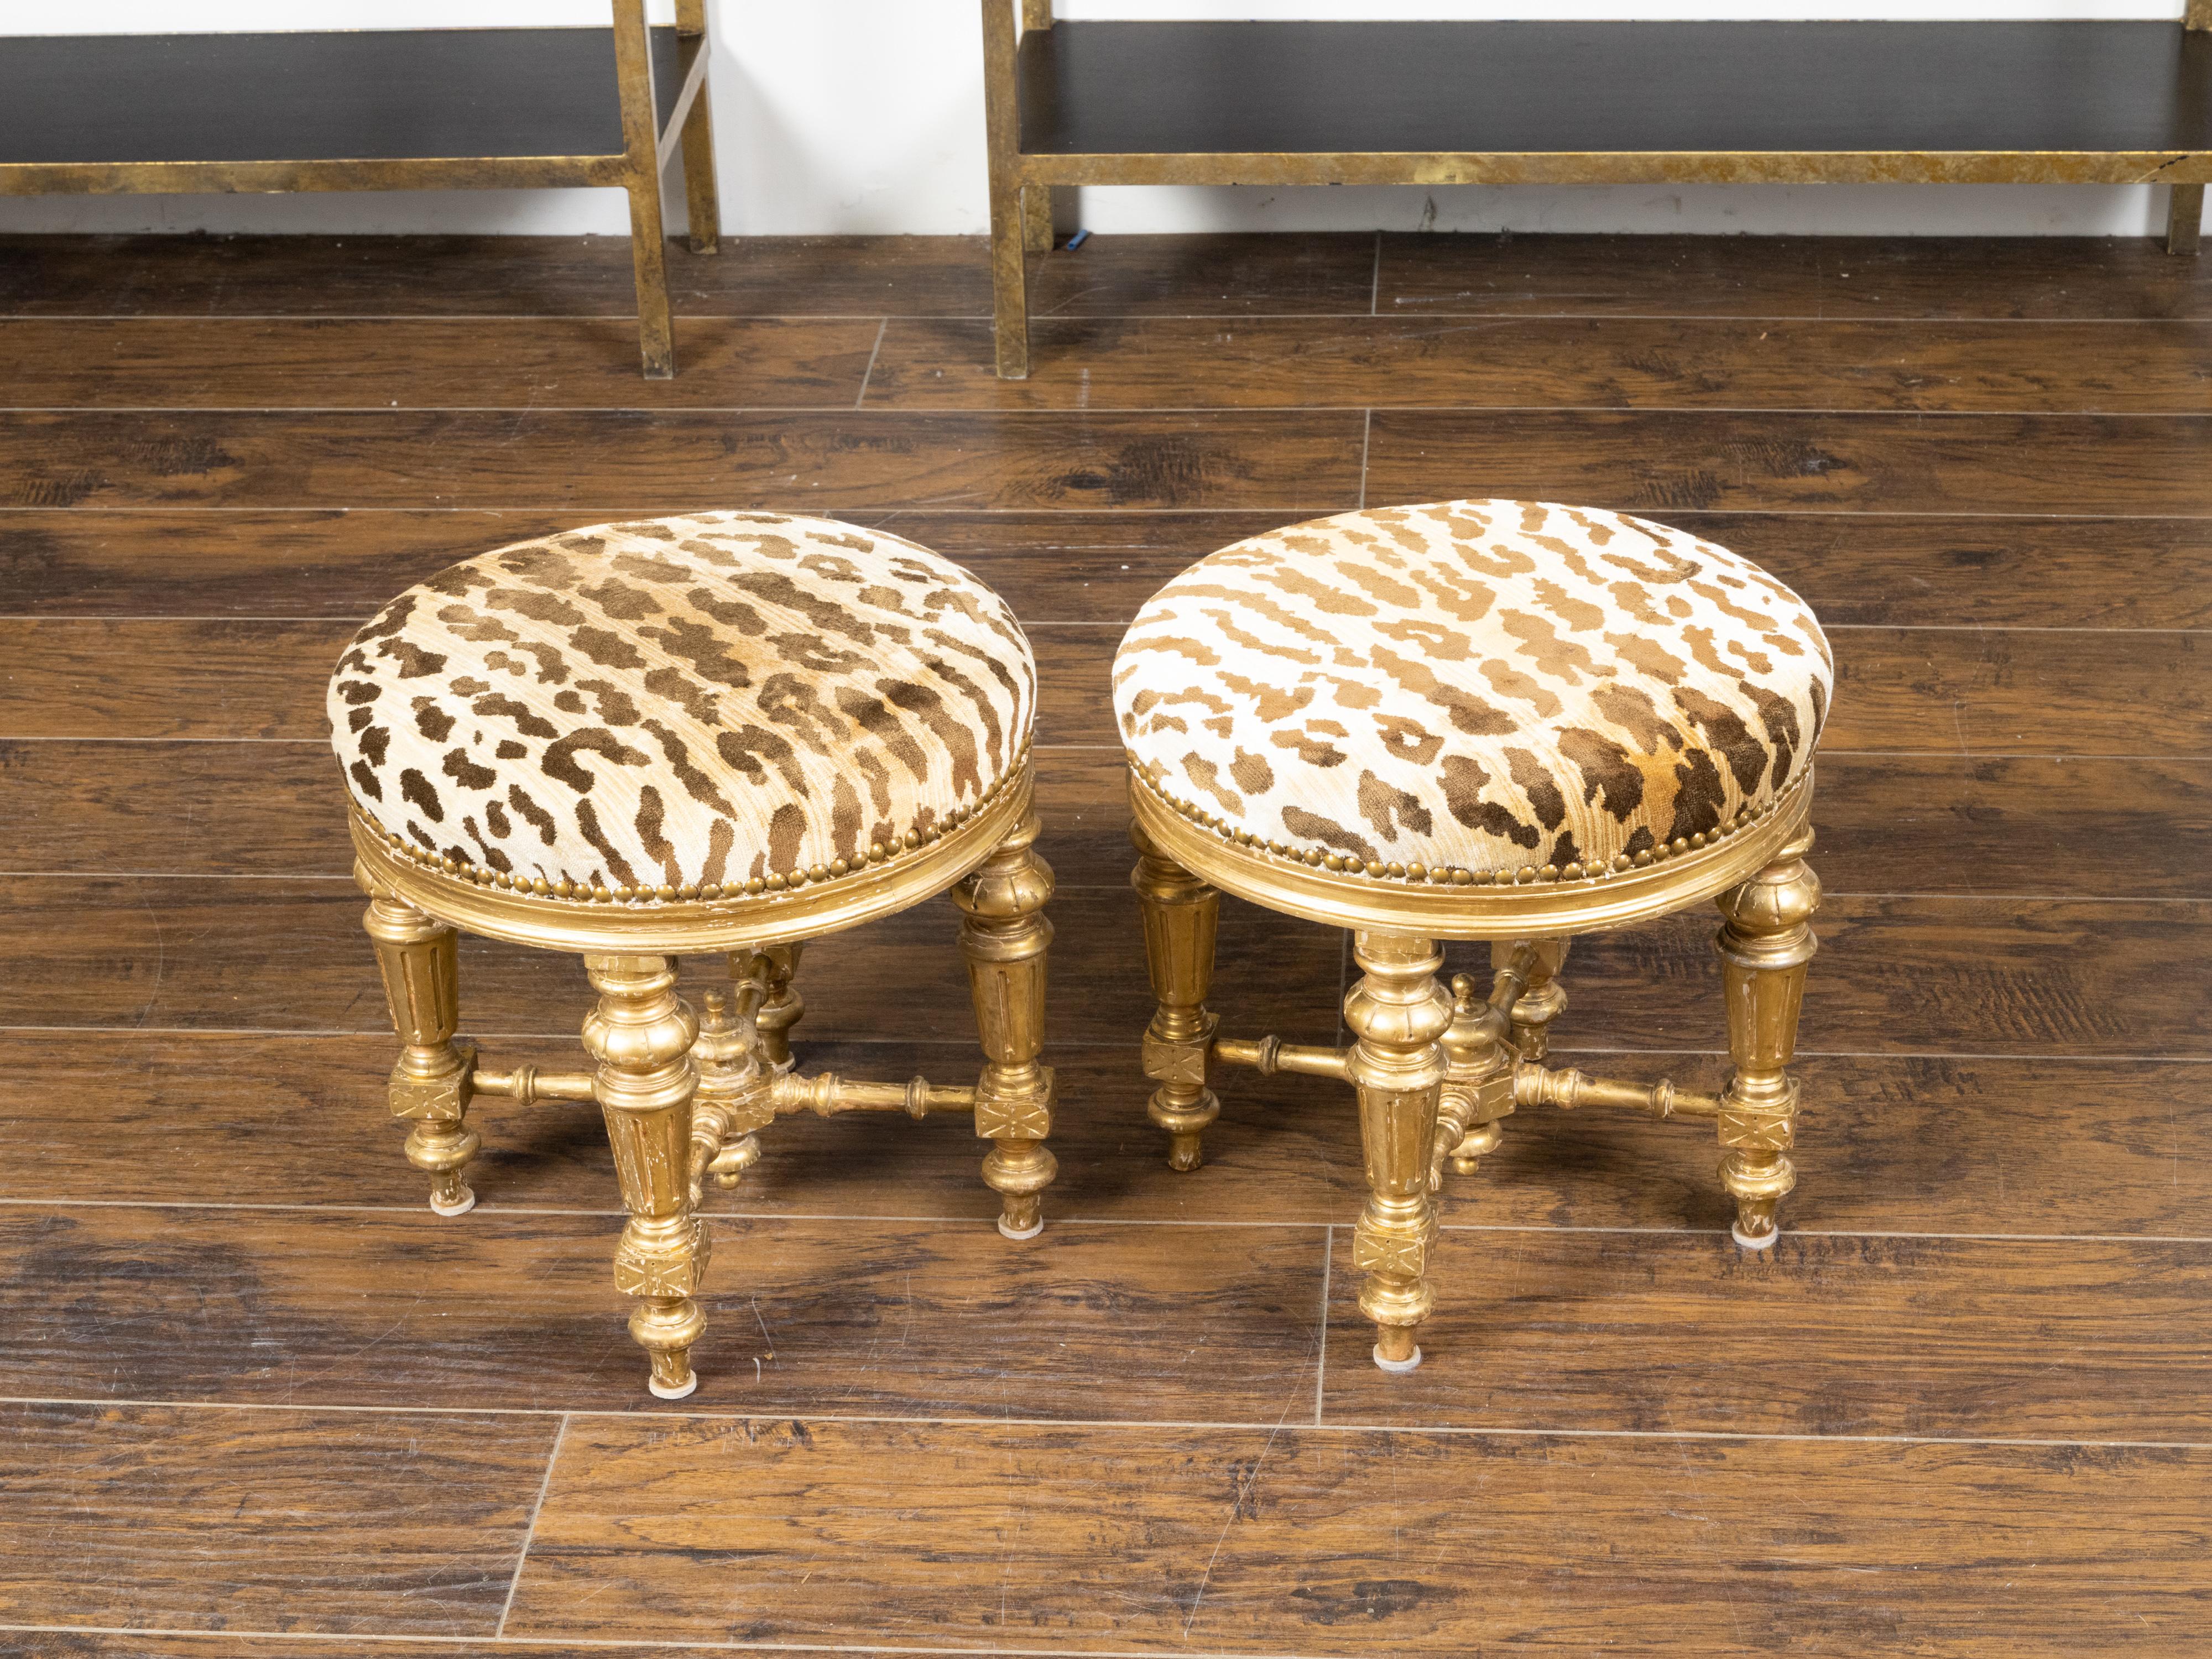 Pair of 19th Century French Giltwood Stools with Fluted Legs and Upholstery For Sale 5